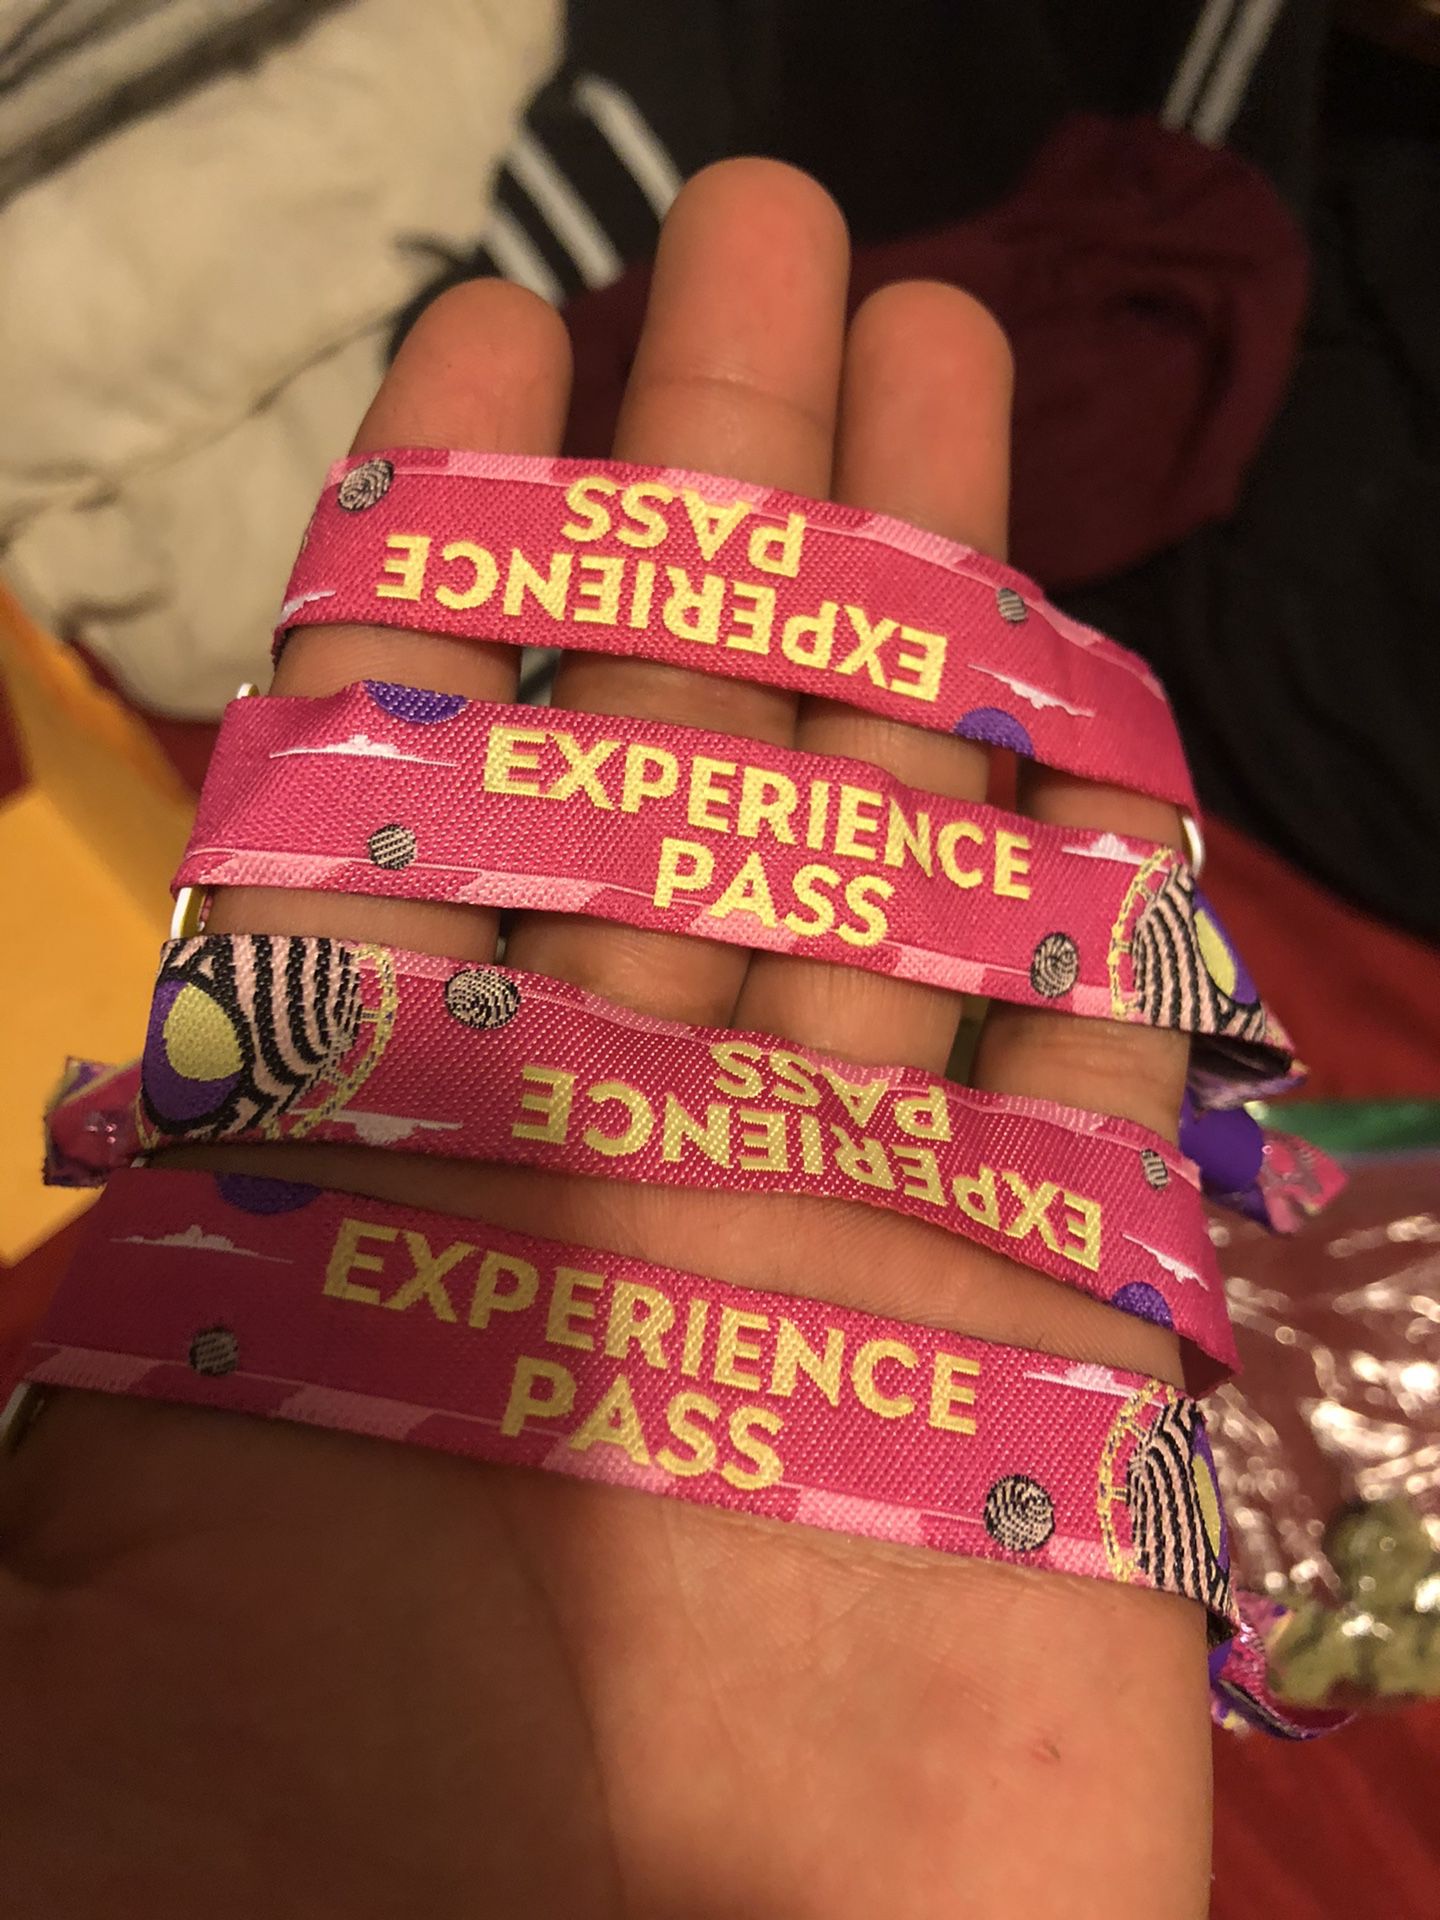 EDC Orlando tickets for Sunday only $100